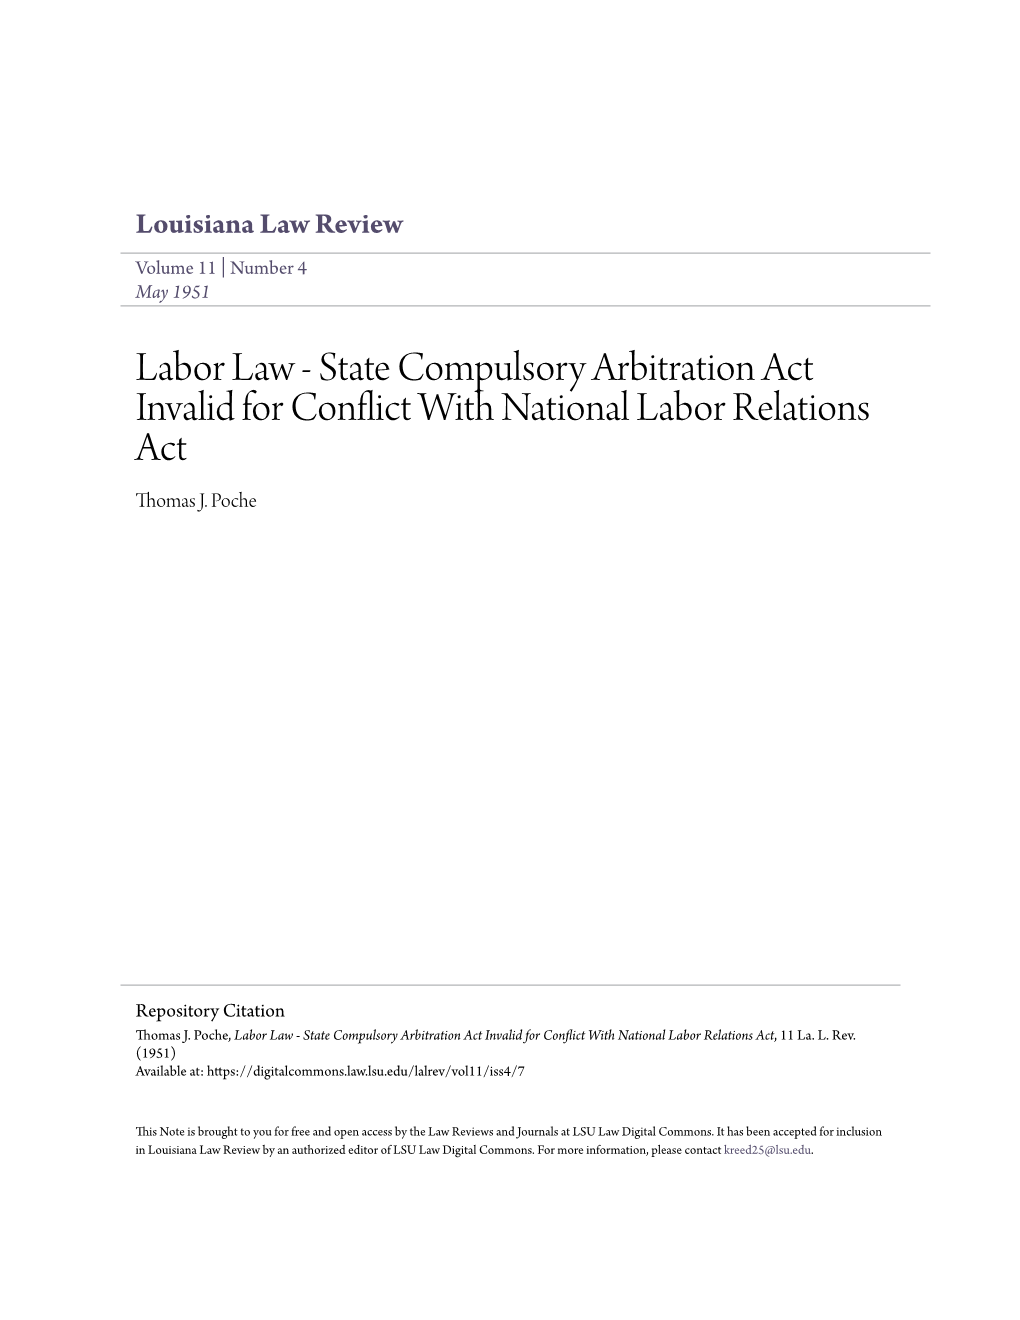 Labor Law - State Compulsory Arbitration Act Invalid for Conflict with National Labor Relations Act Thomas J